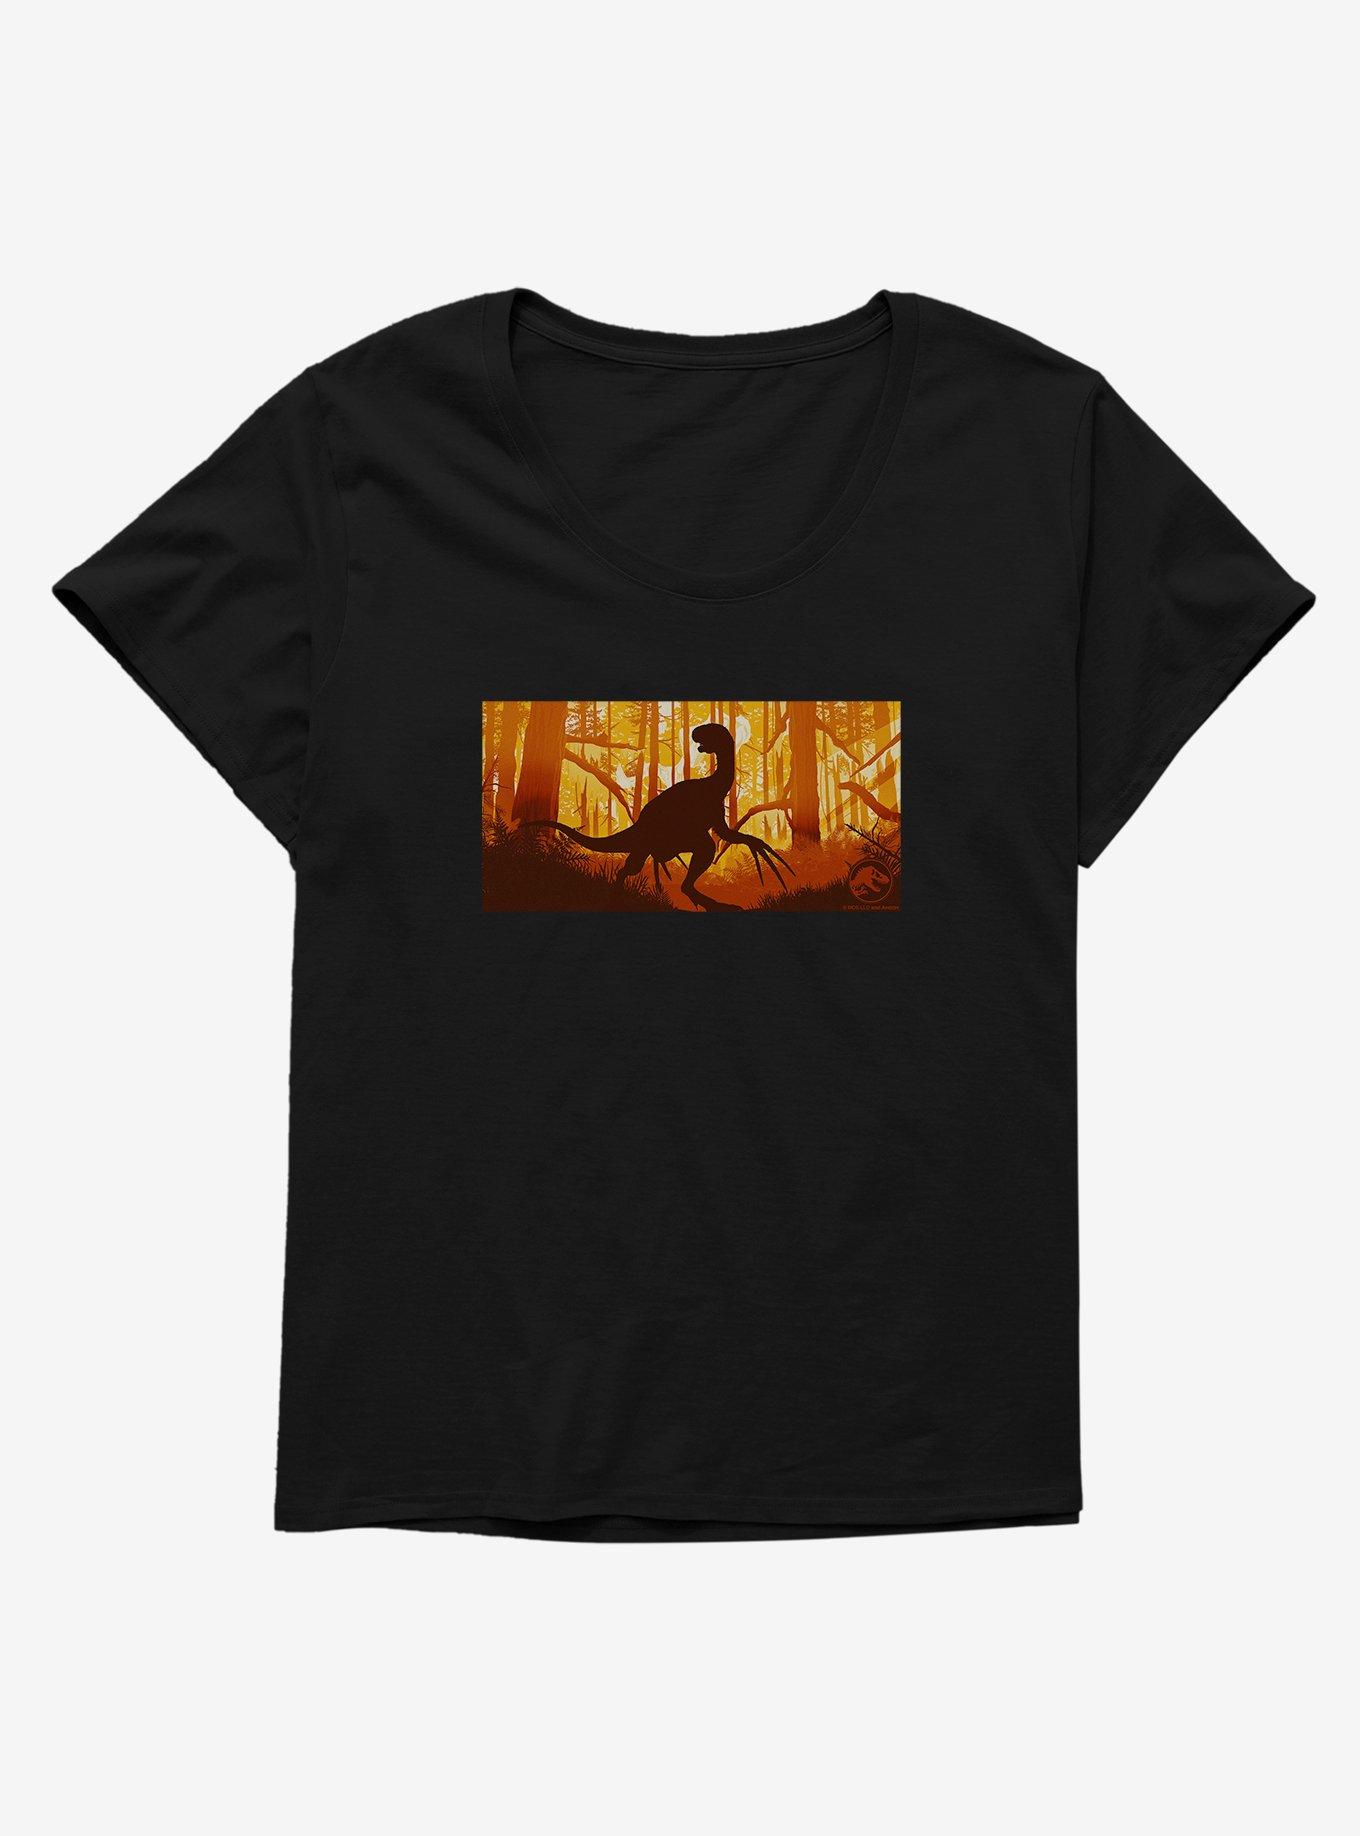 Jurassic World Dominion In The Wild Womens T-Shirt Plus Size, , hi-res